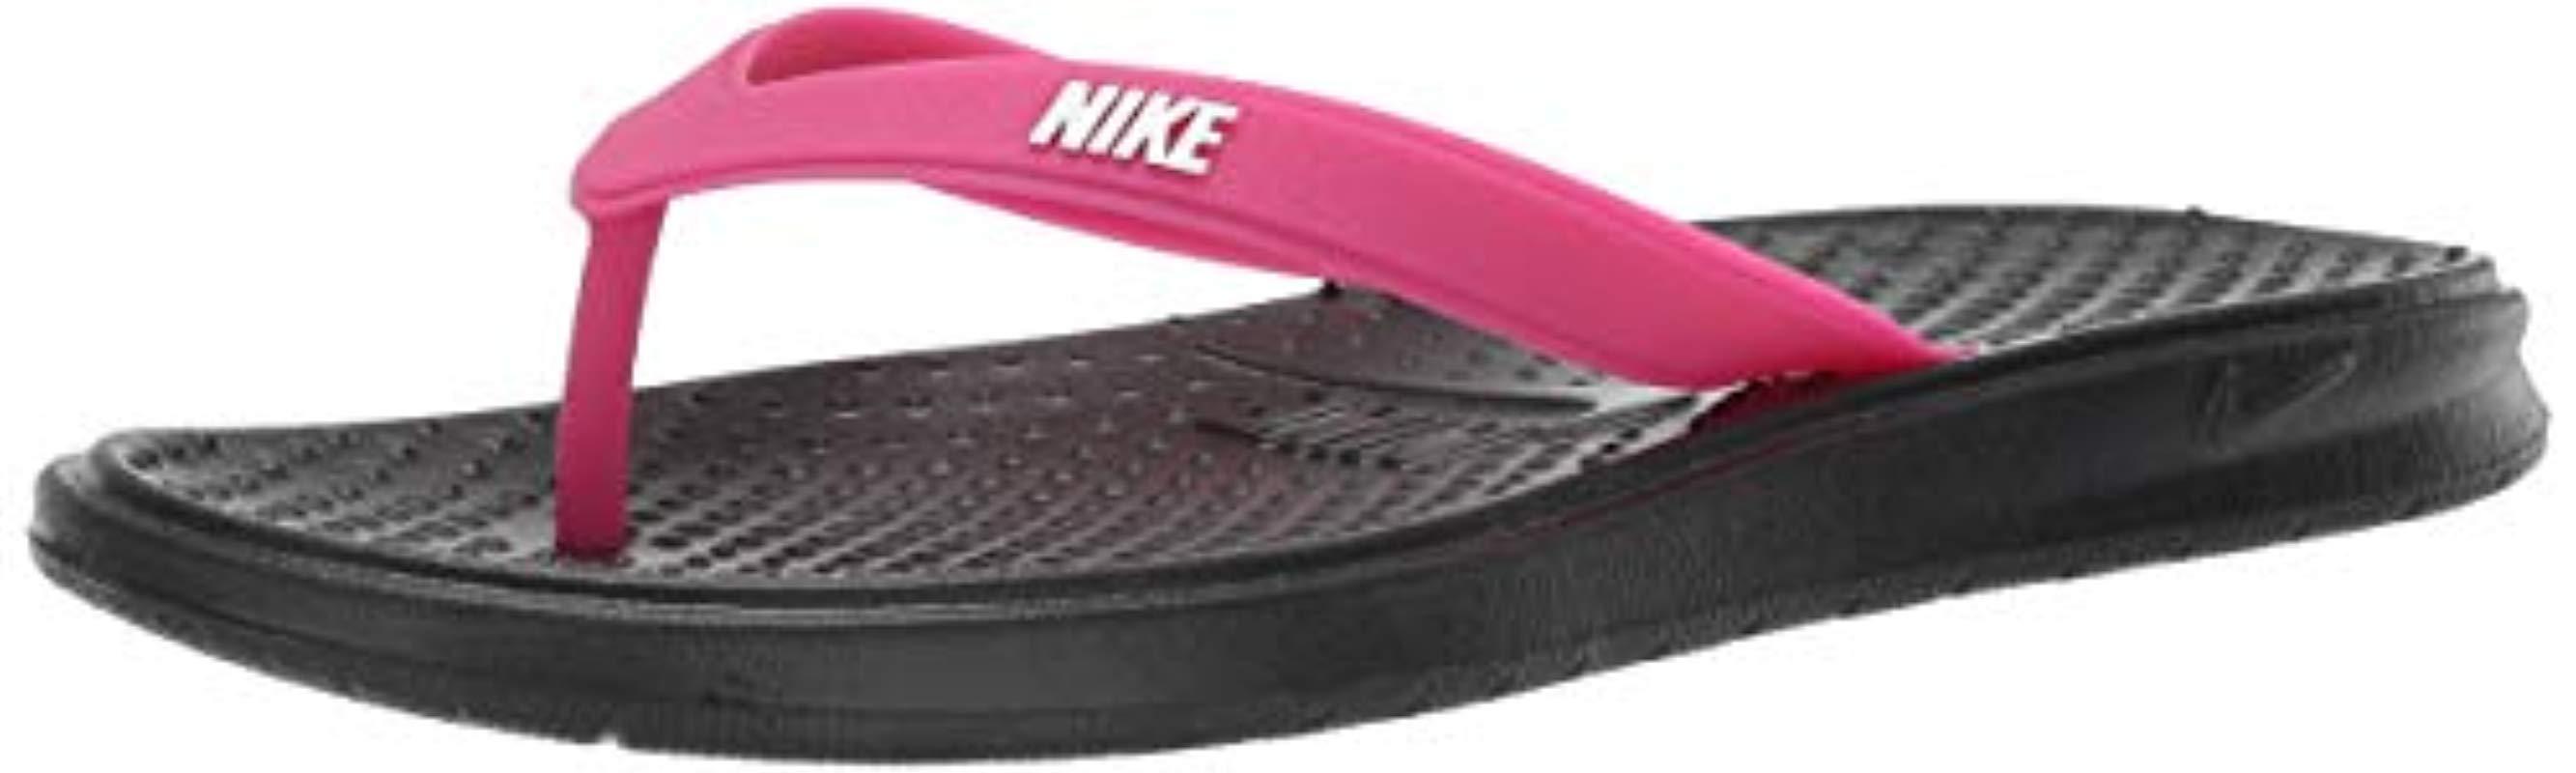 Nike Rubber Solay Thong Sport Sandal in Black/White/Vivid Pink (Pink) - Lyst